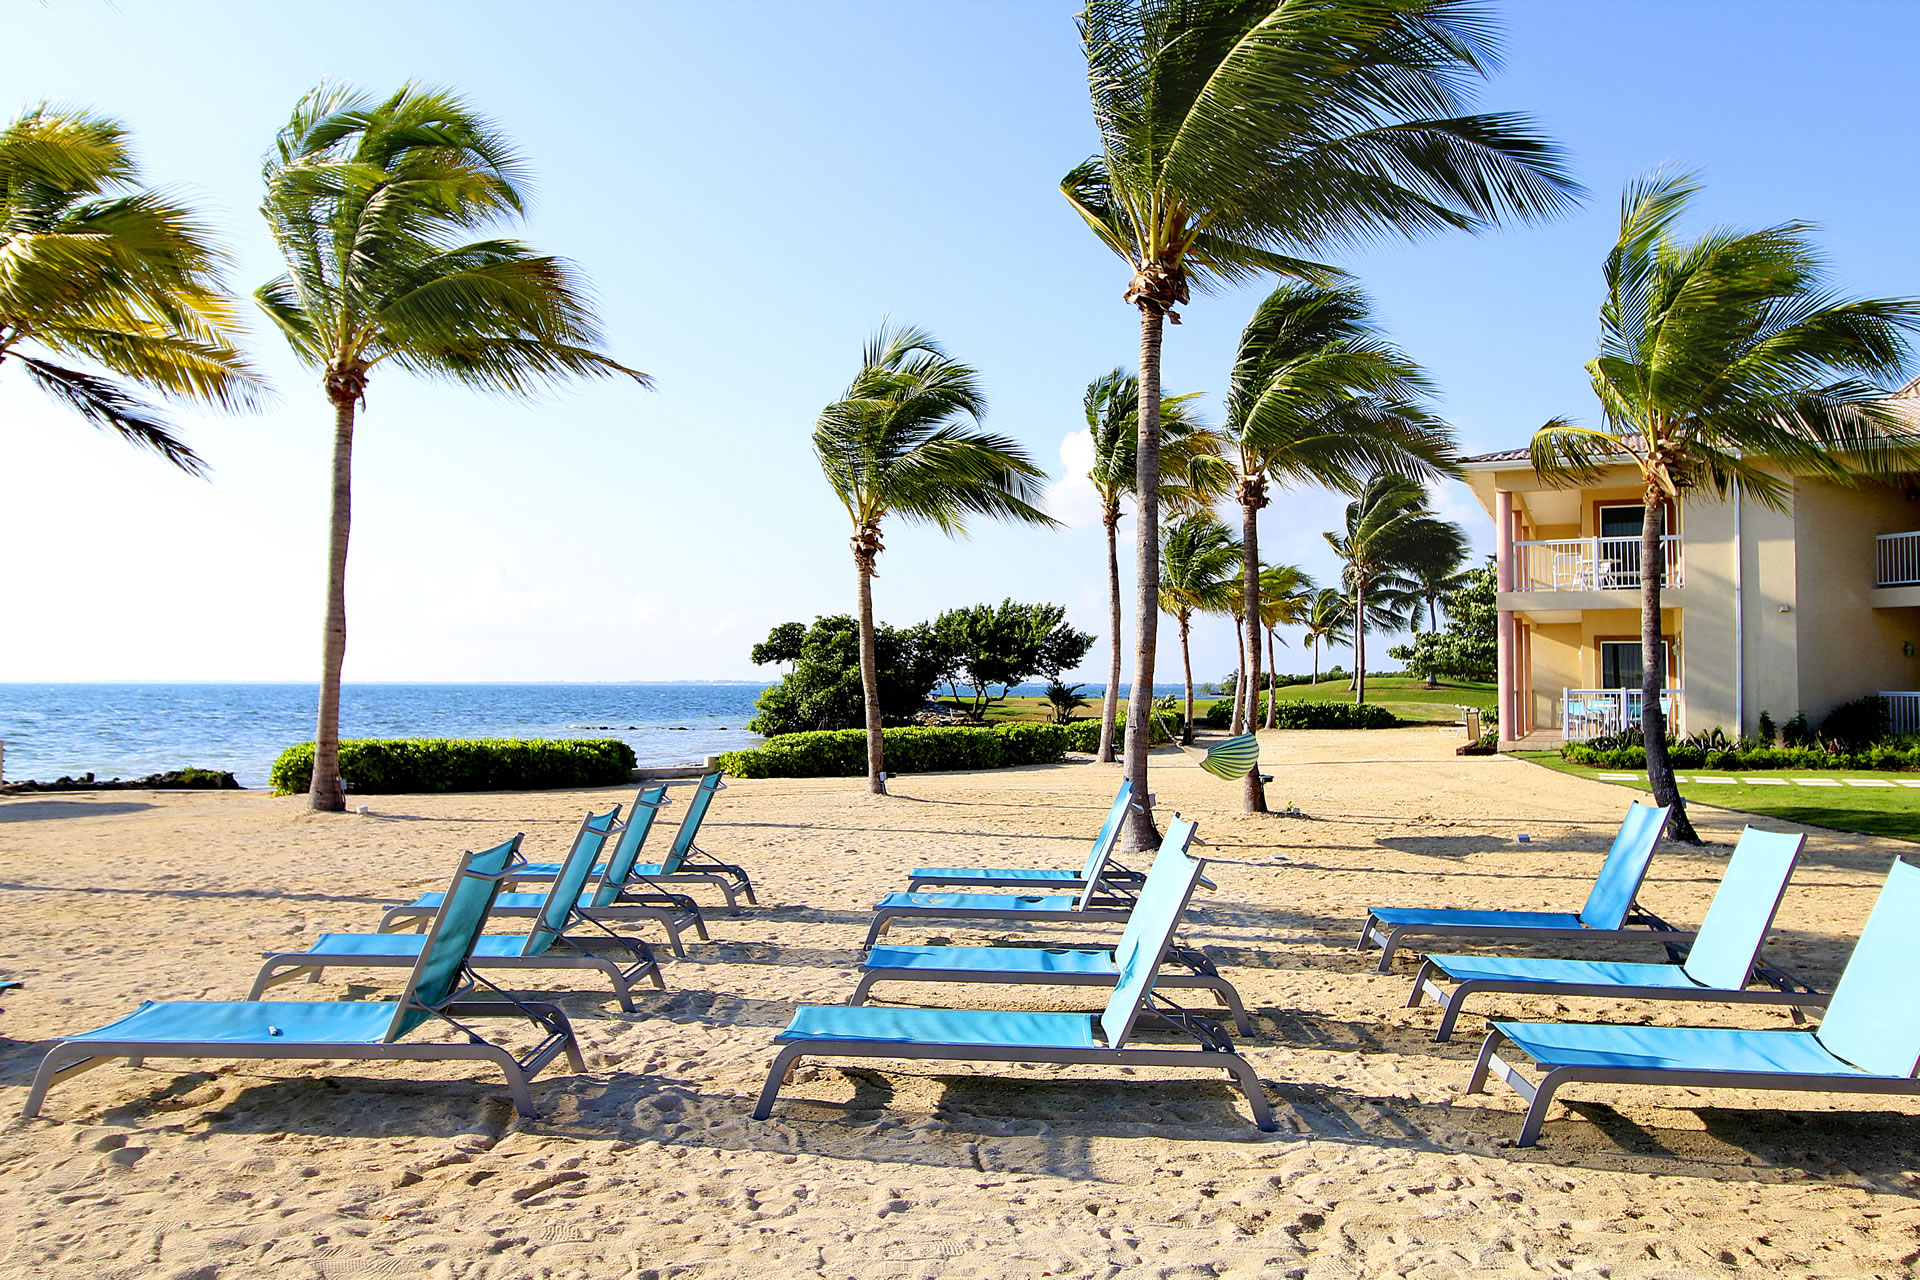 Lounge chairs in three rows at the Grand Caymanian Resort beach.